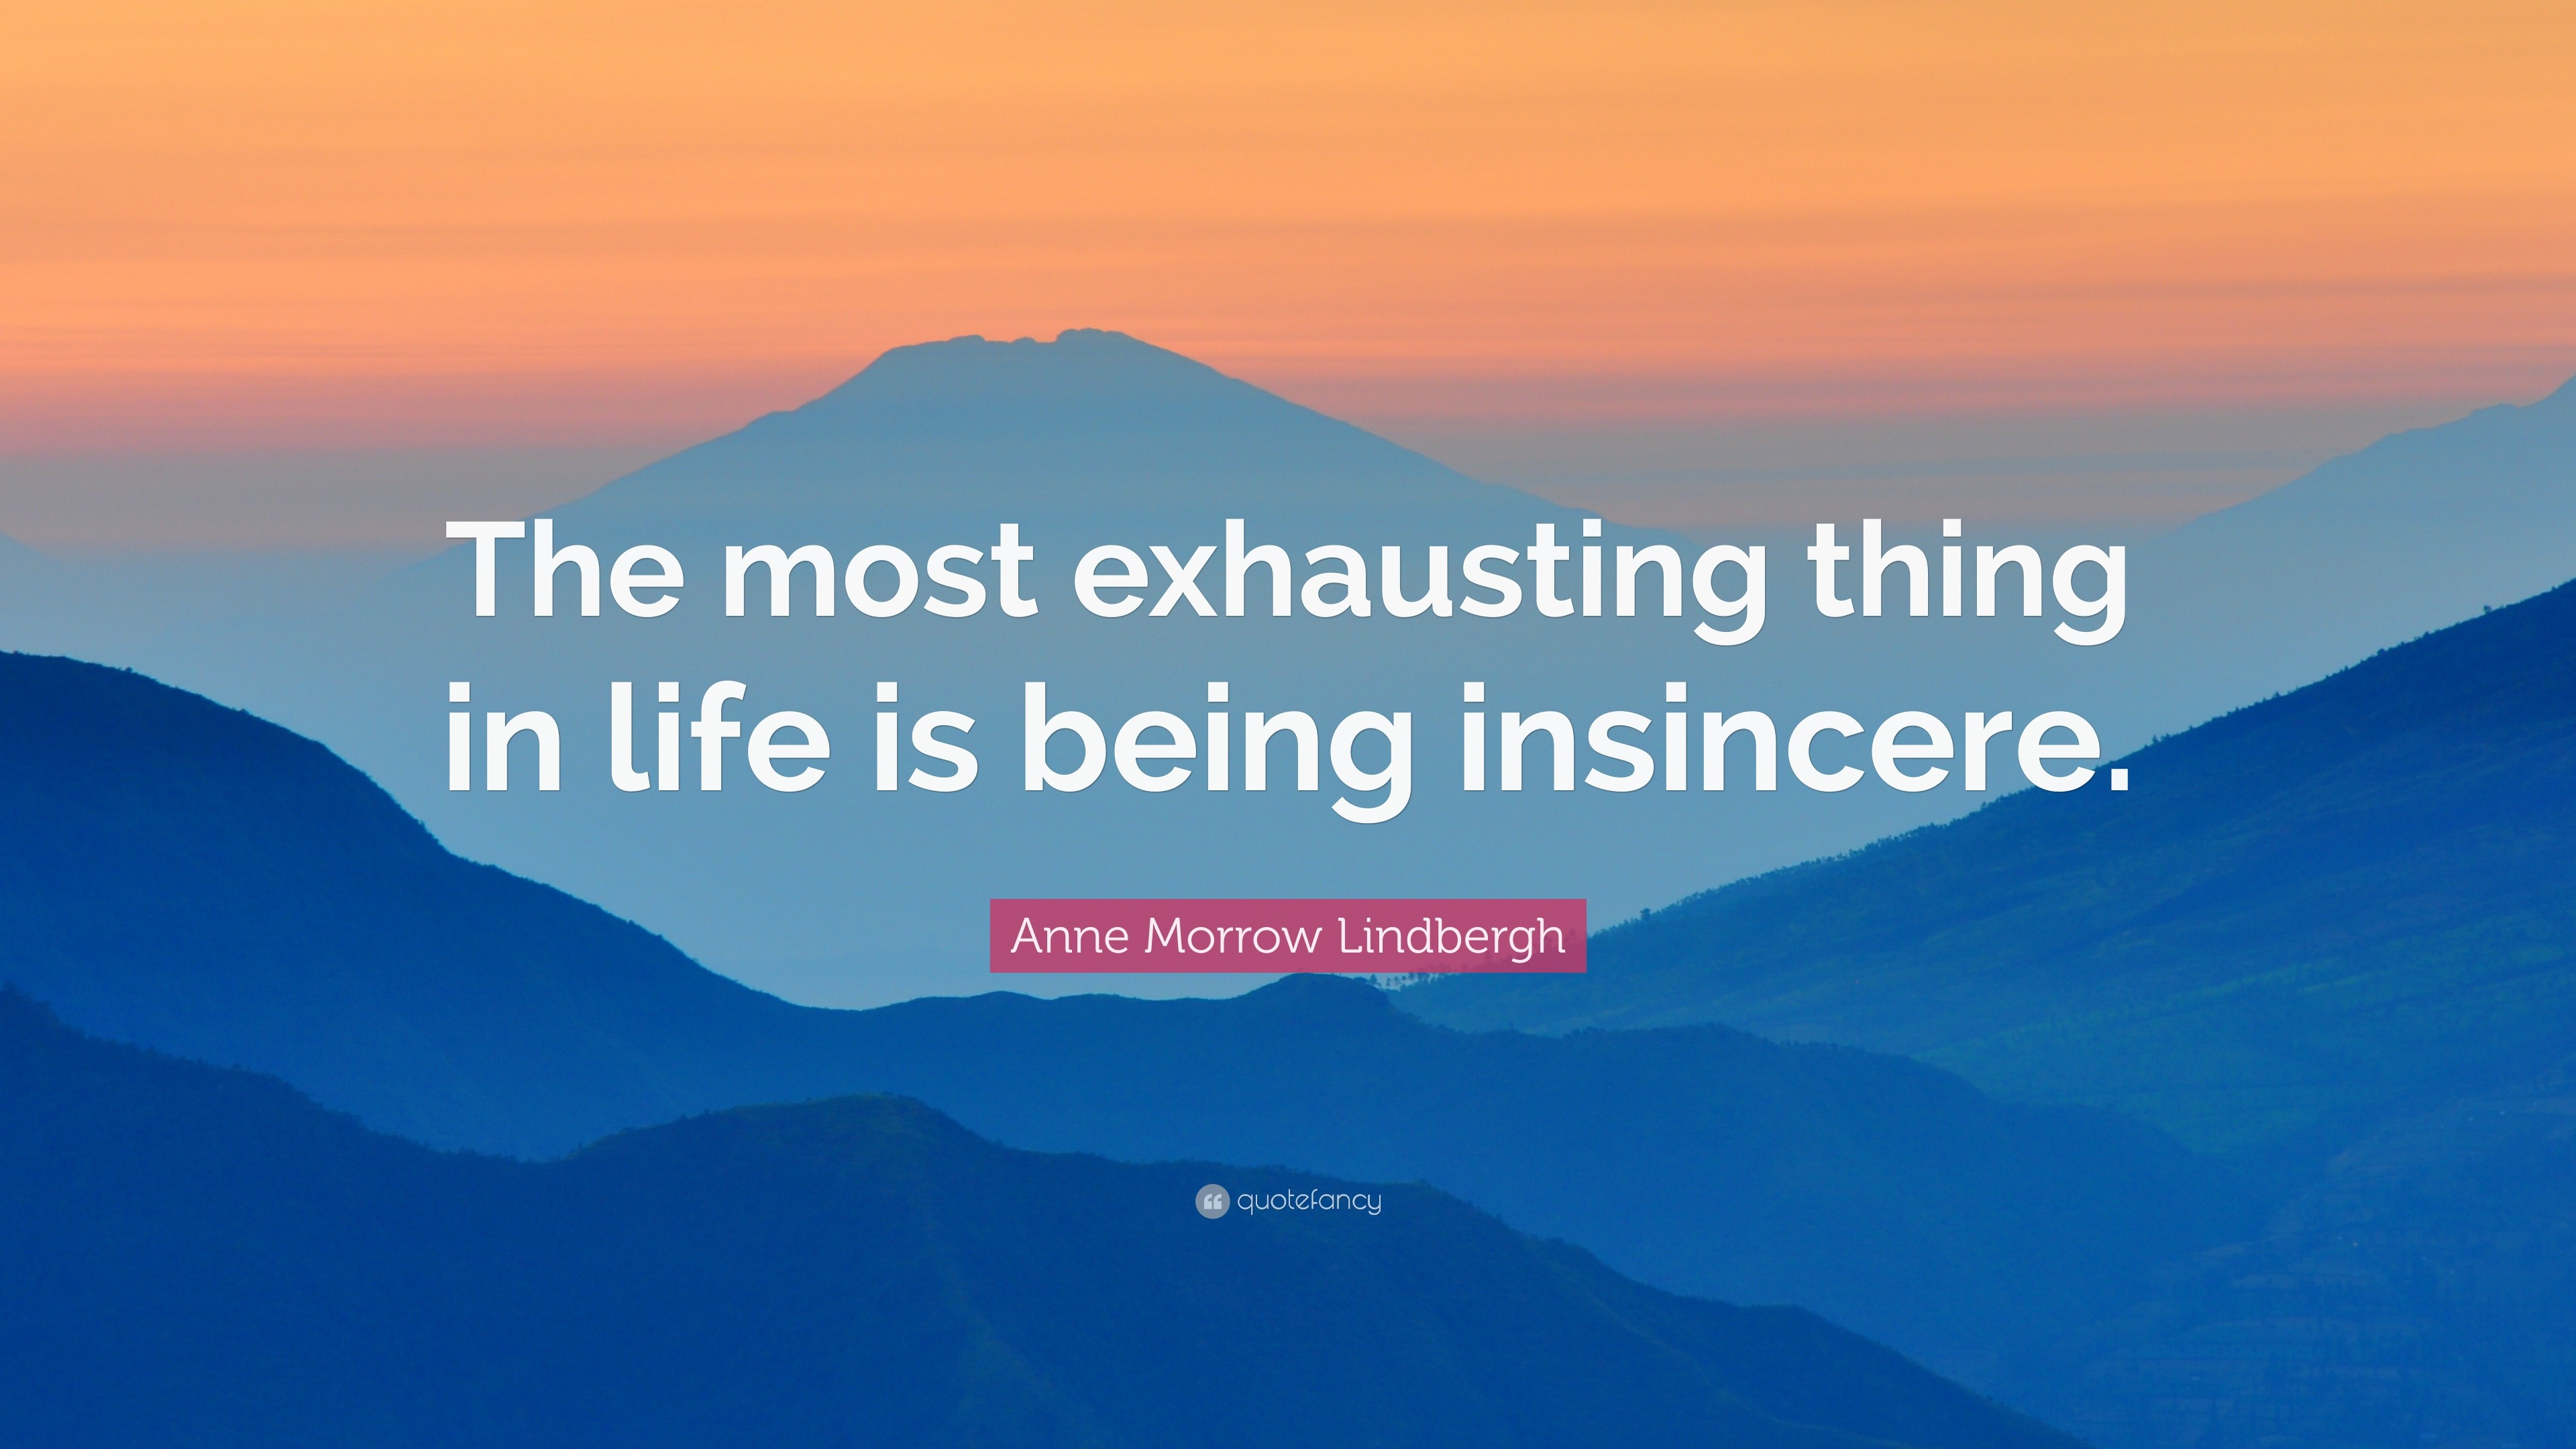 Anne Morrow Lindbergh Quote: “The most exhausting thing in life is ...